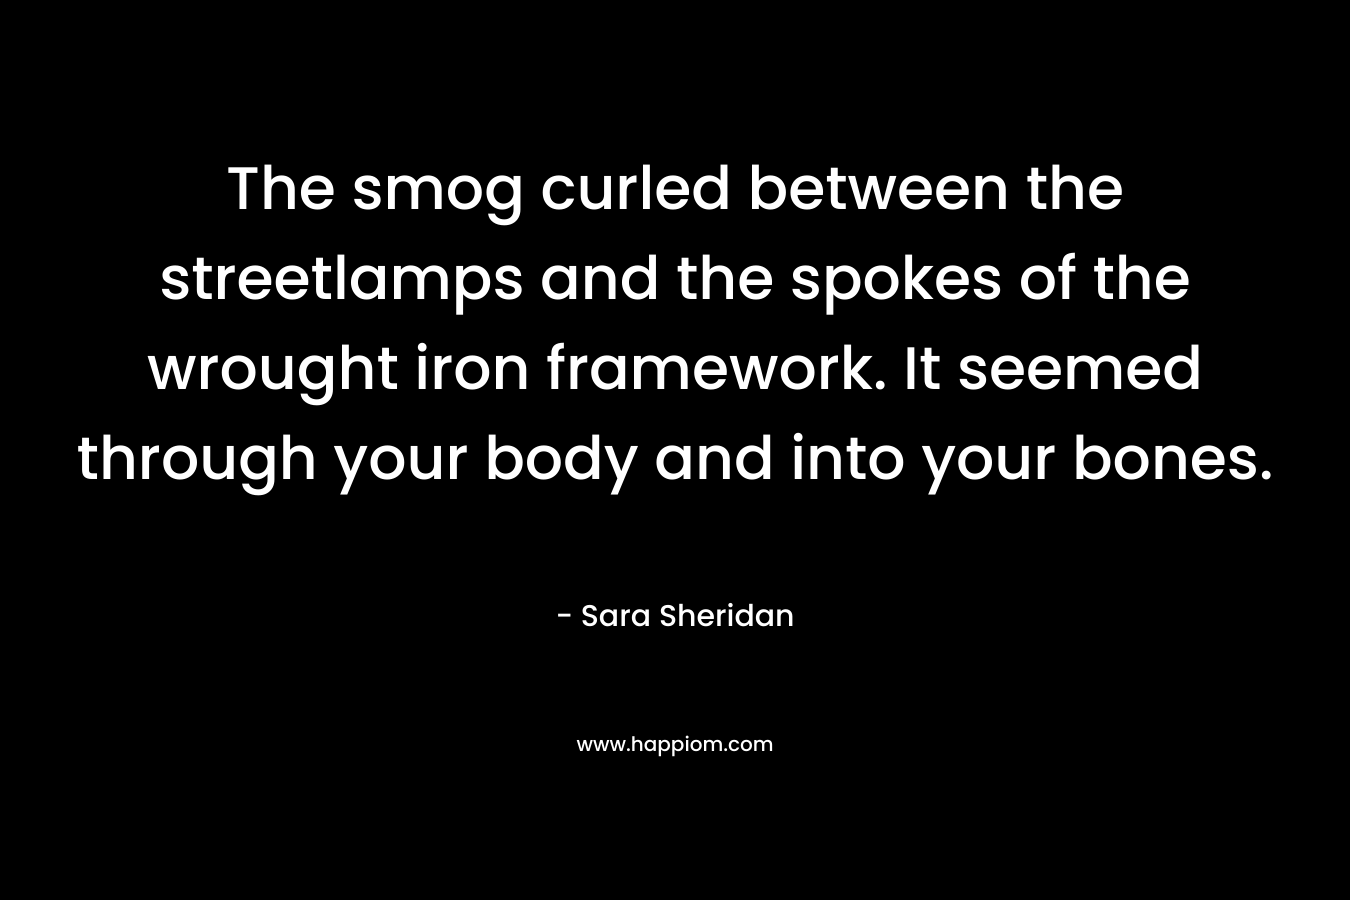 The smog curled between the streetlamps and the spokes of the wrought iron framework. It seemed through your body and into your bones.